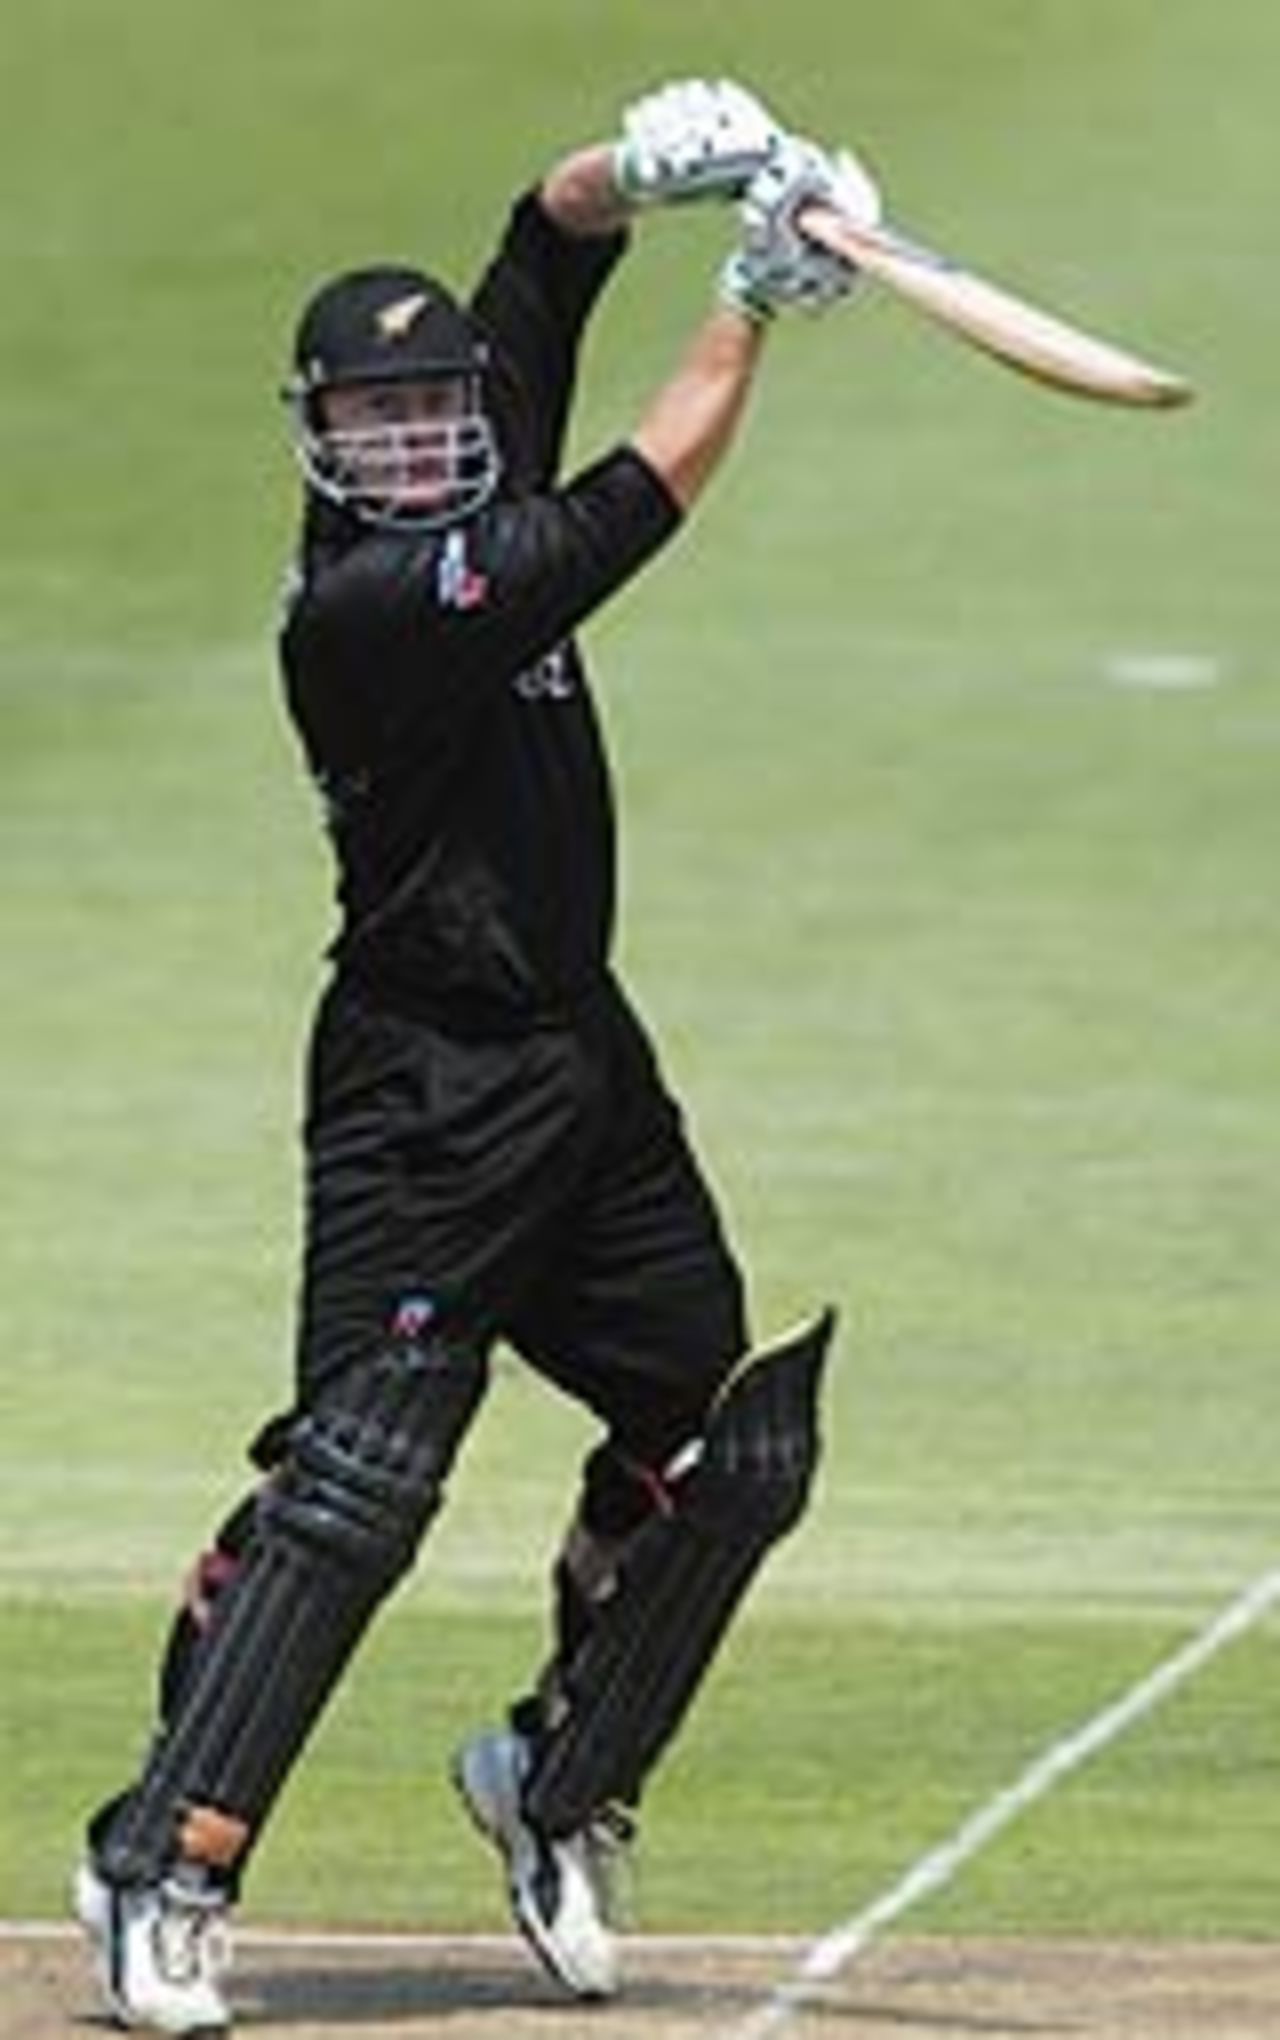 Scott Styris of New Zealand hits a four during the ICC Cricket World Cup, New Zealand v West Indies, St Georges Park, World Cup,February 13, 2003